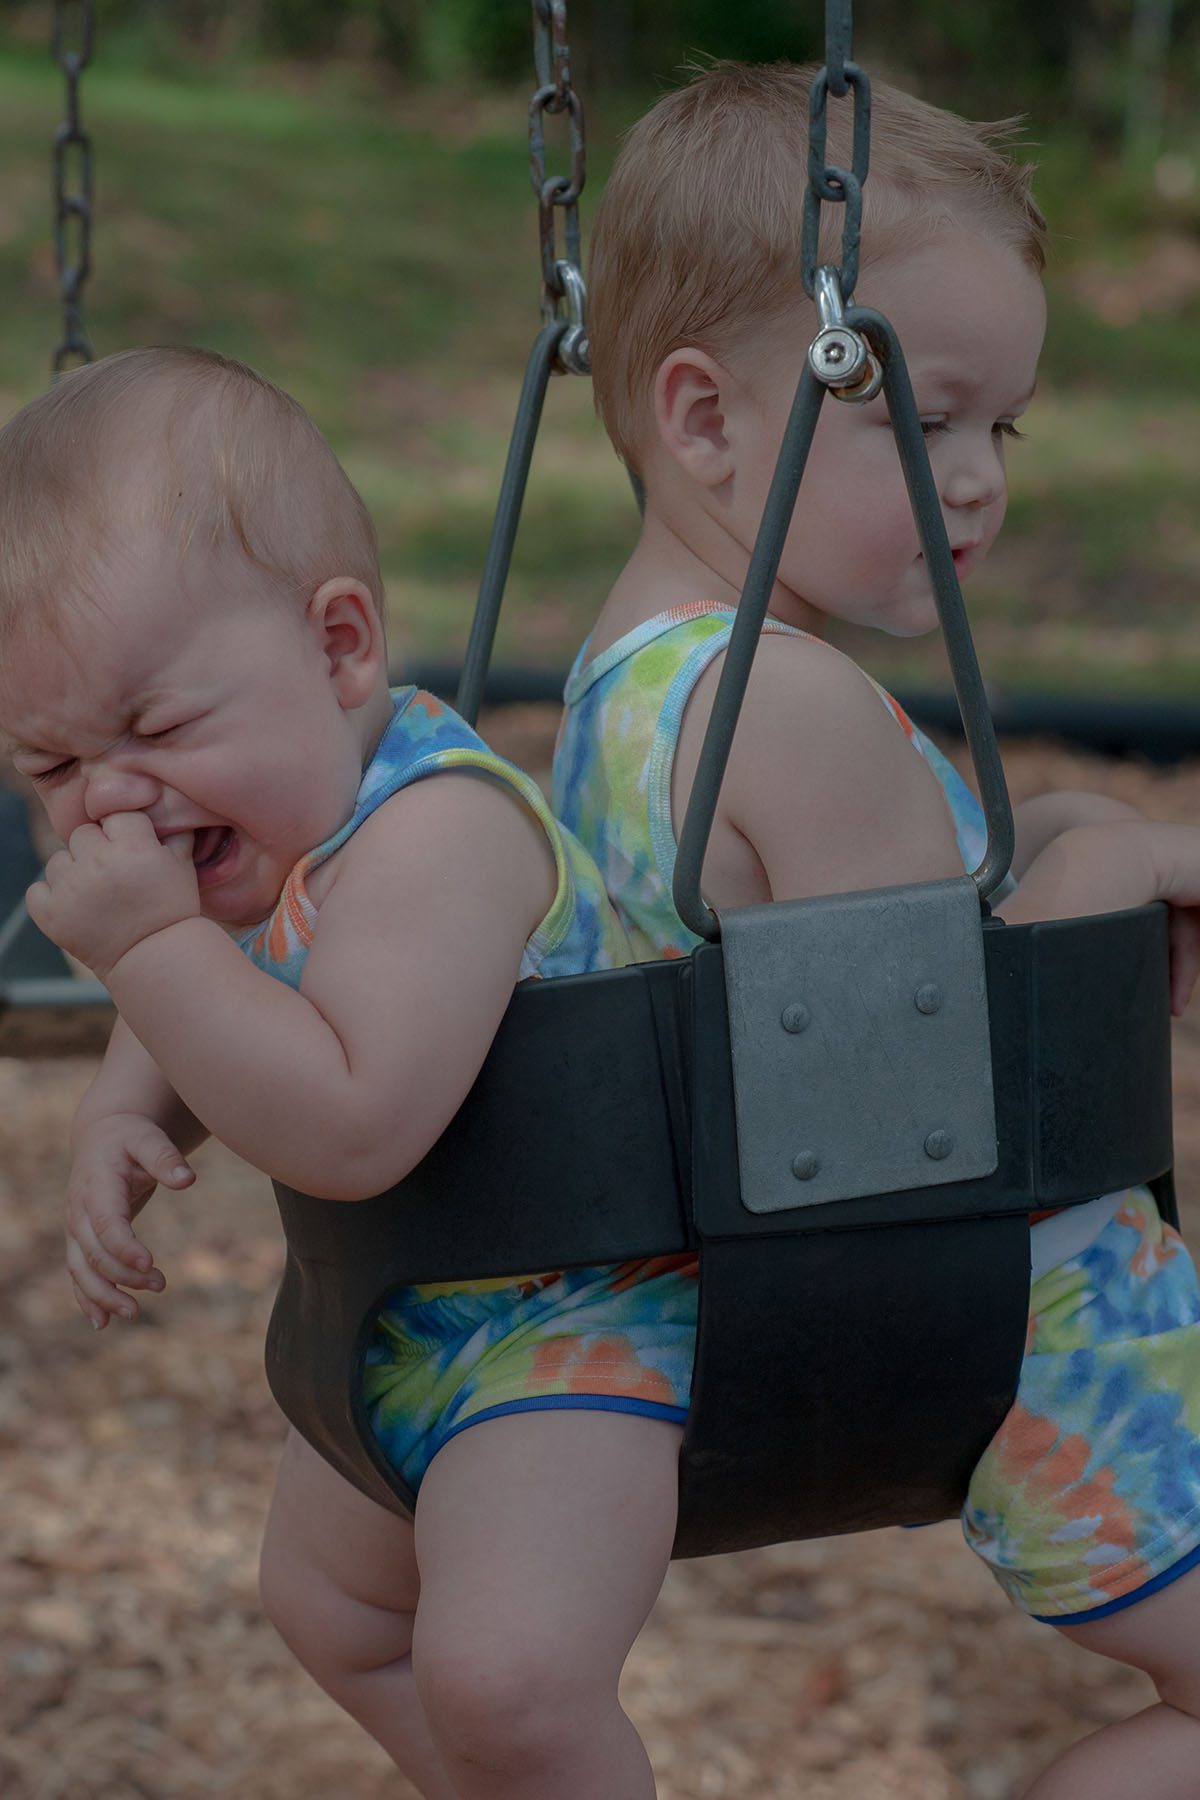 Children play on a swing set, the youngest cries.